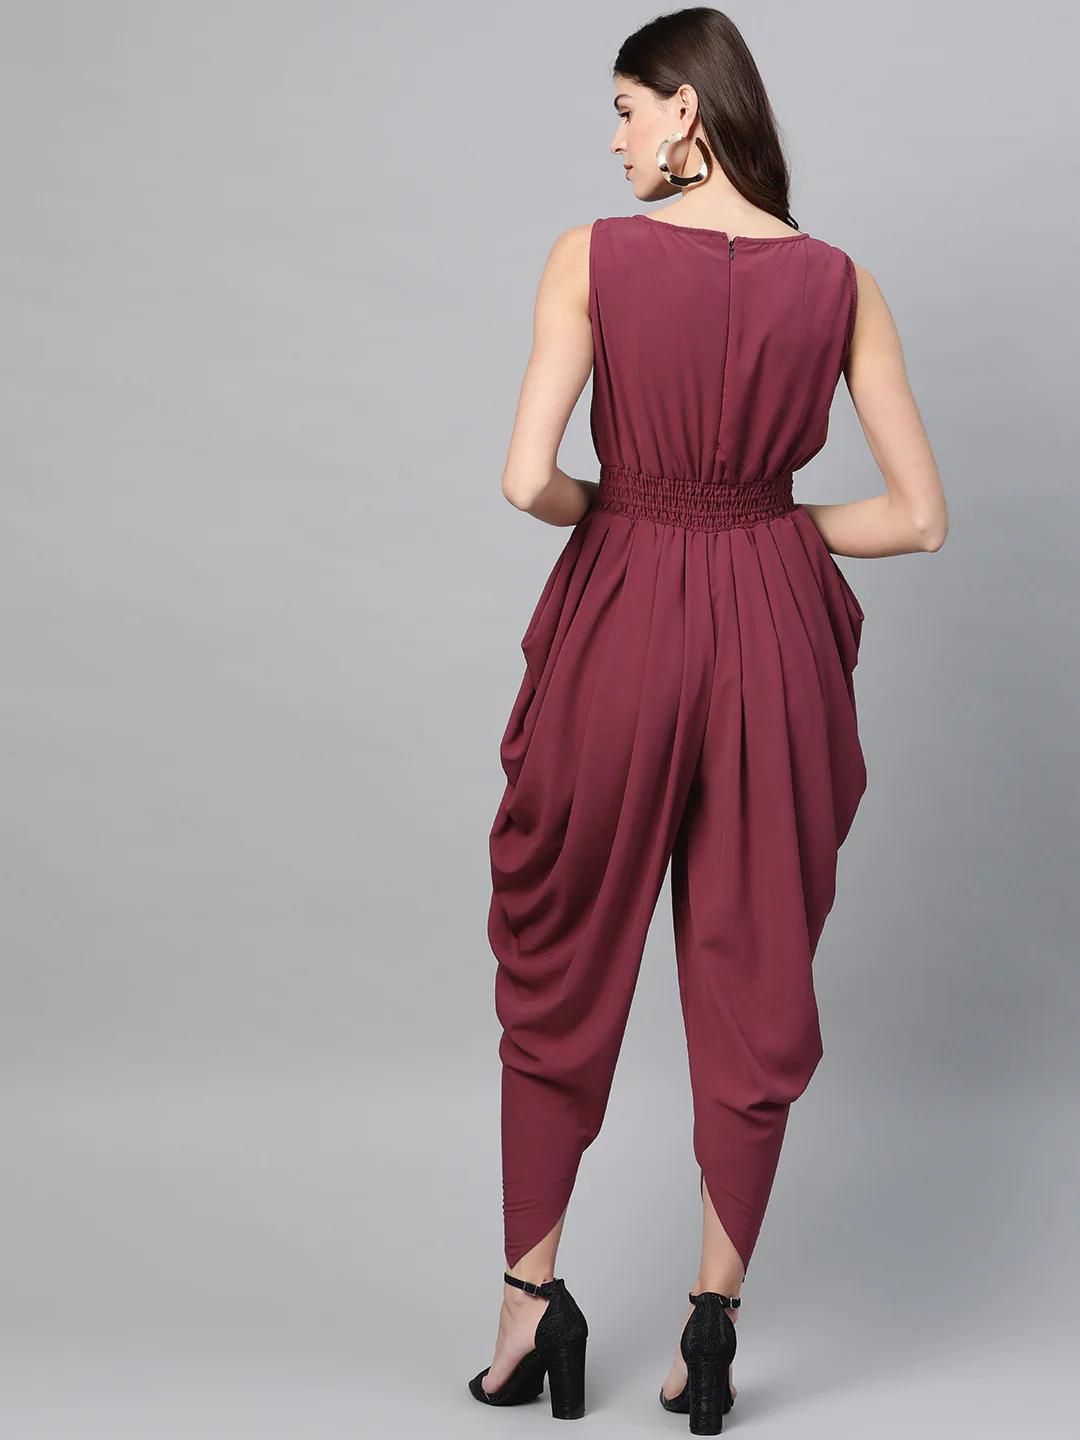 PANNKH Purple Intricate Hand Embroidered Cowl Jumpsuit